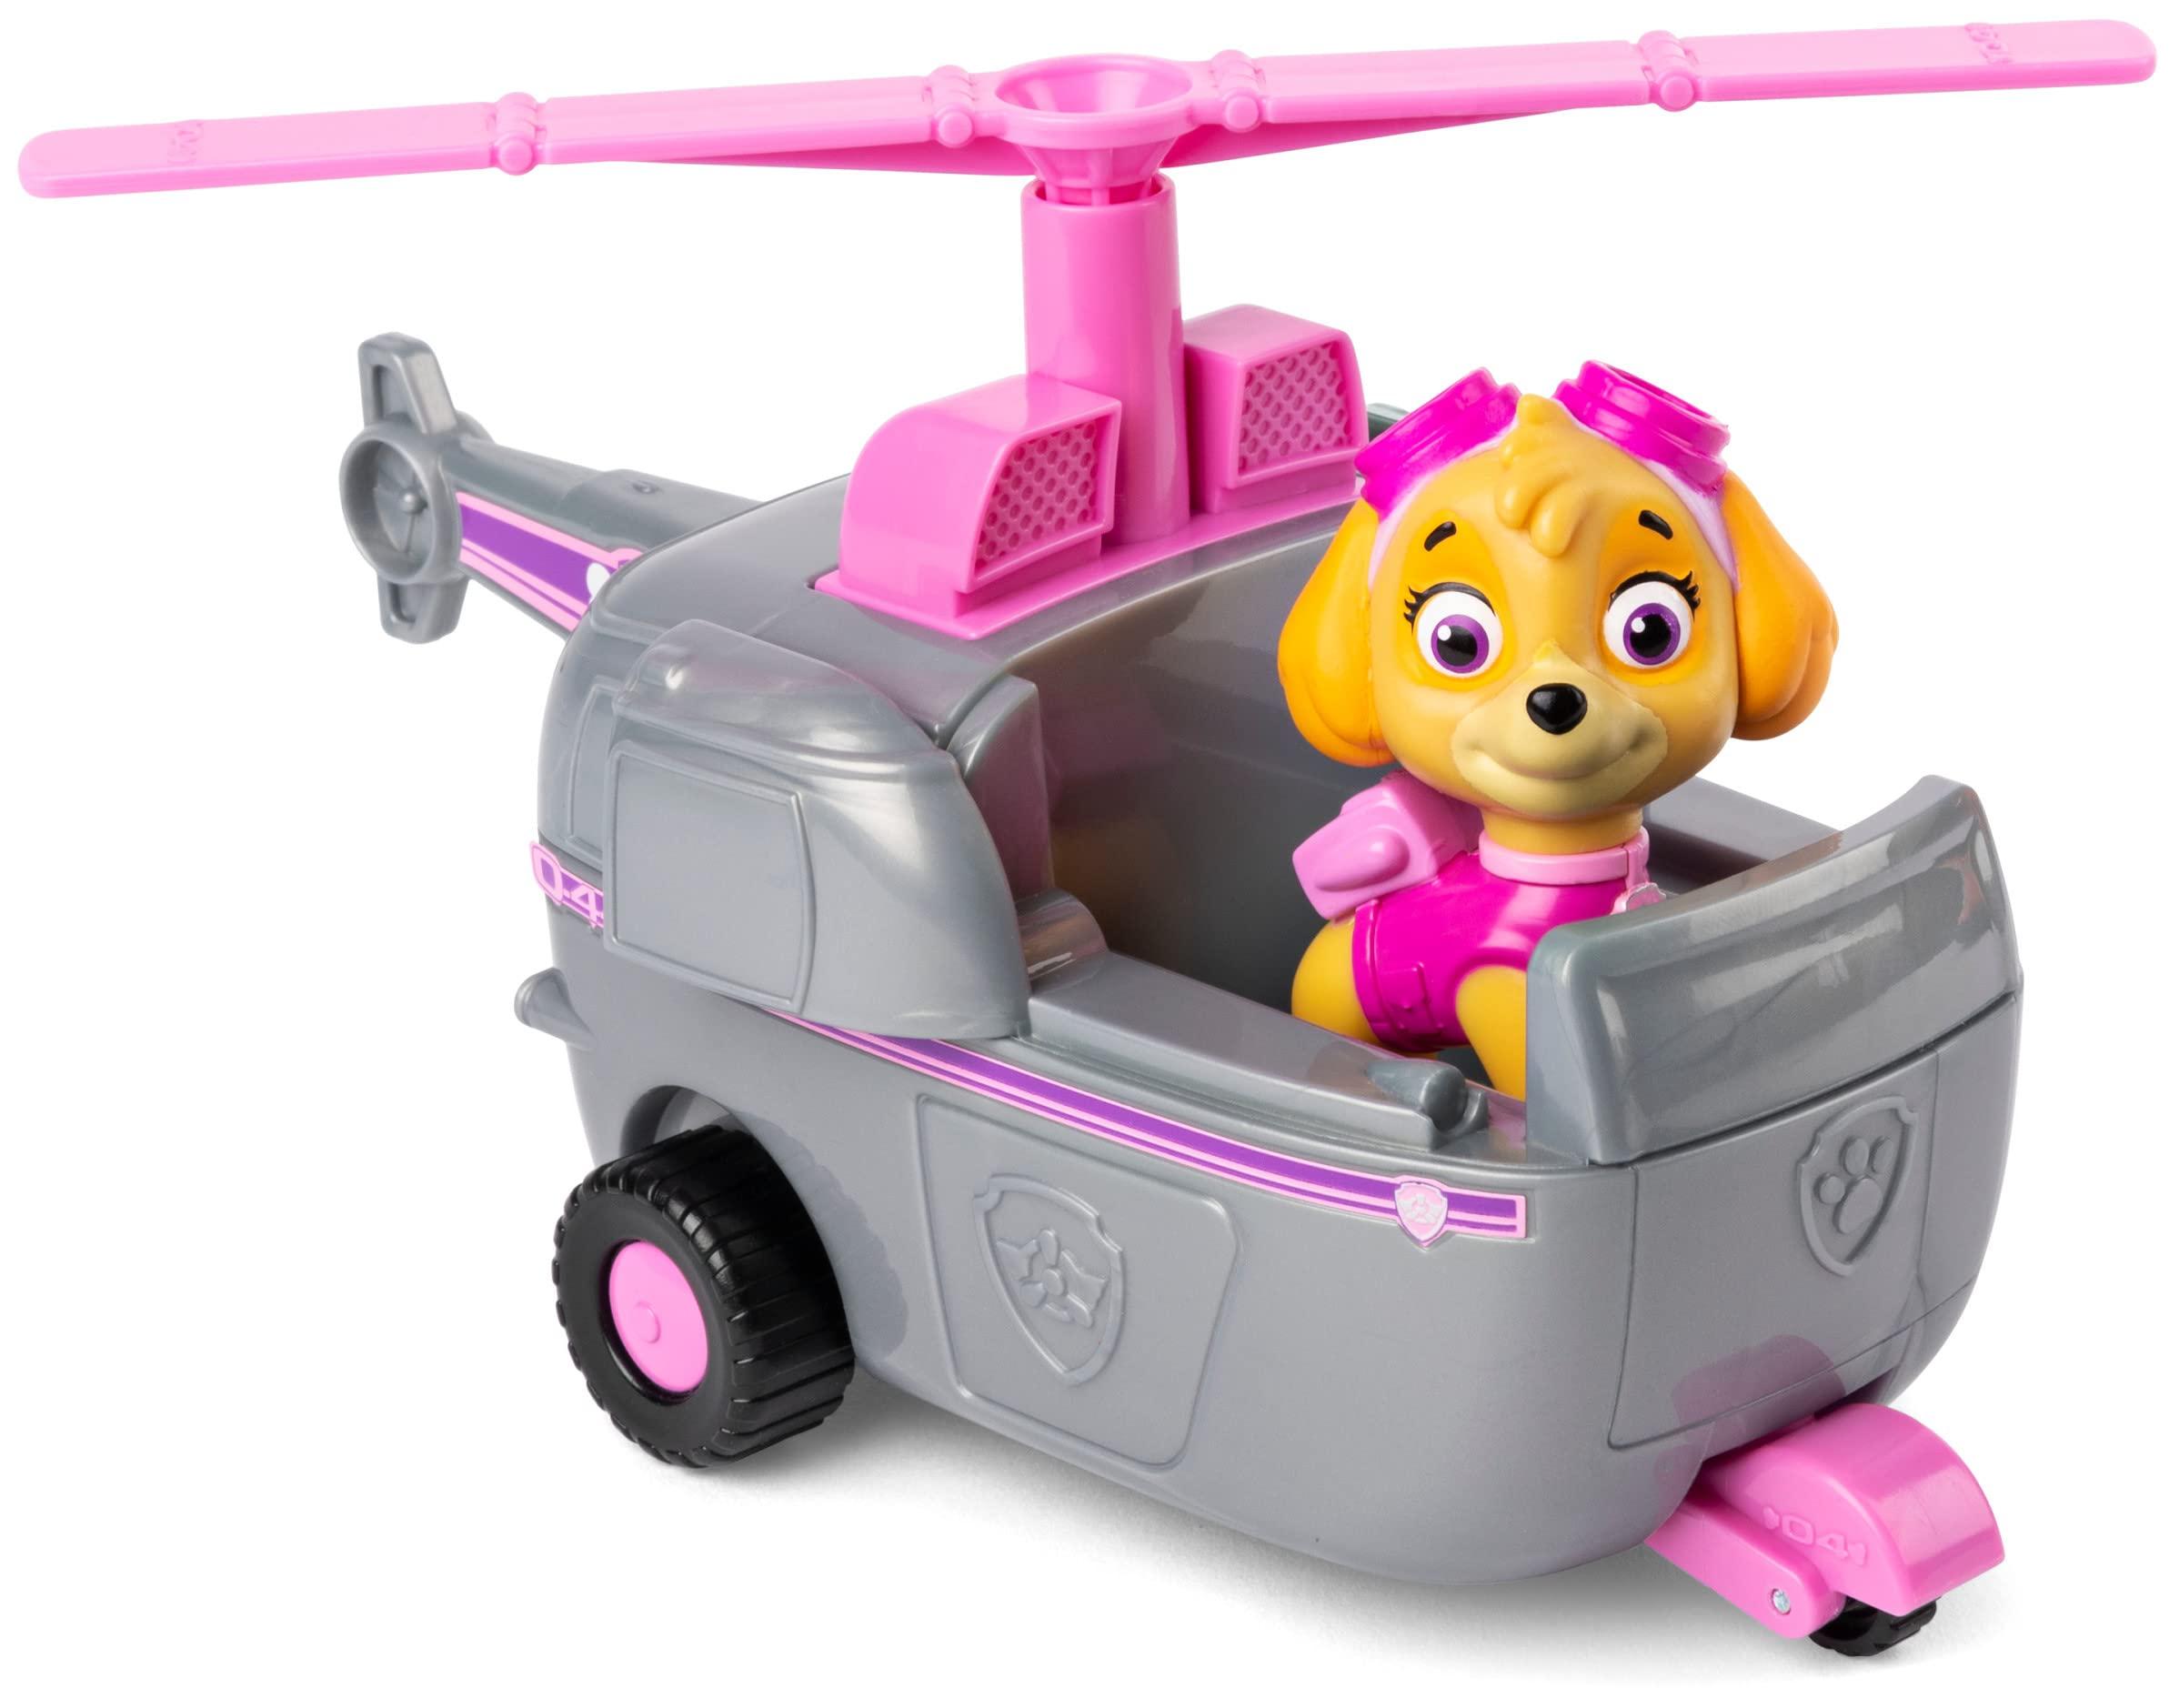 Paw Patrol Skye Radio Control Helicopter: Skye Radio Control Helicopter: A Fun and Educational Toy for Your Little Pilot